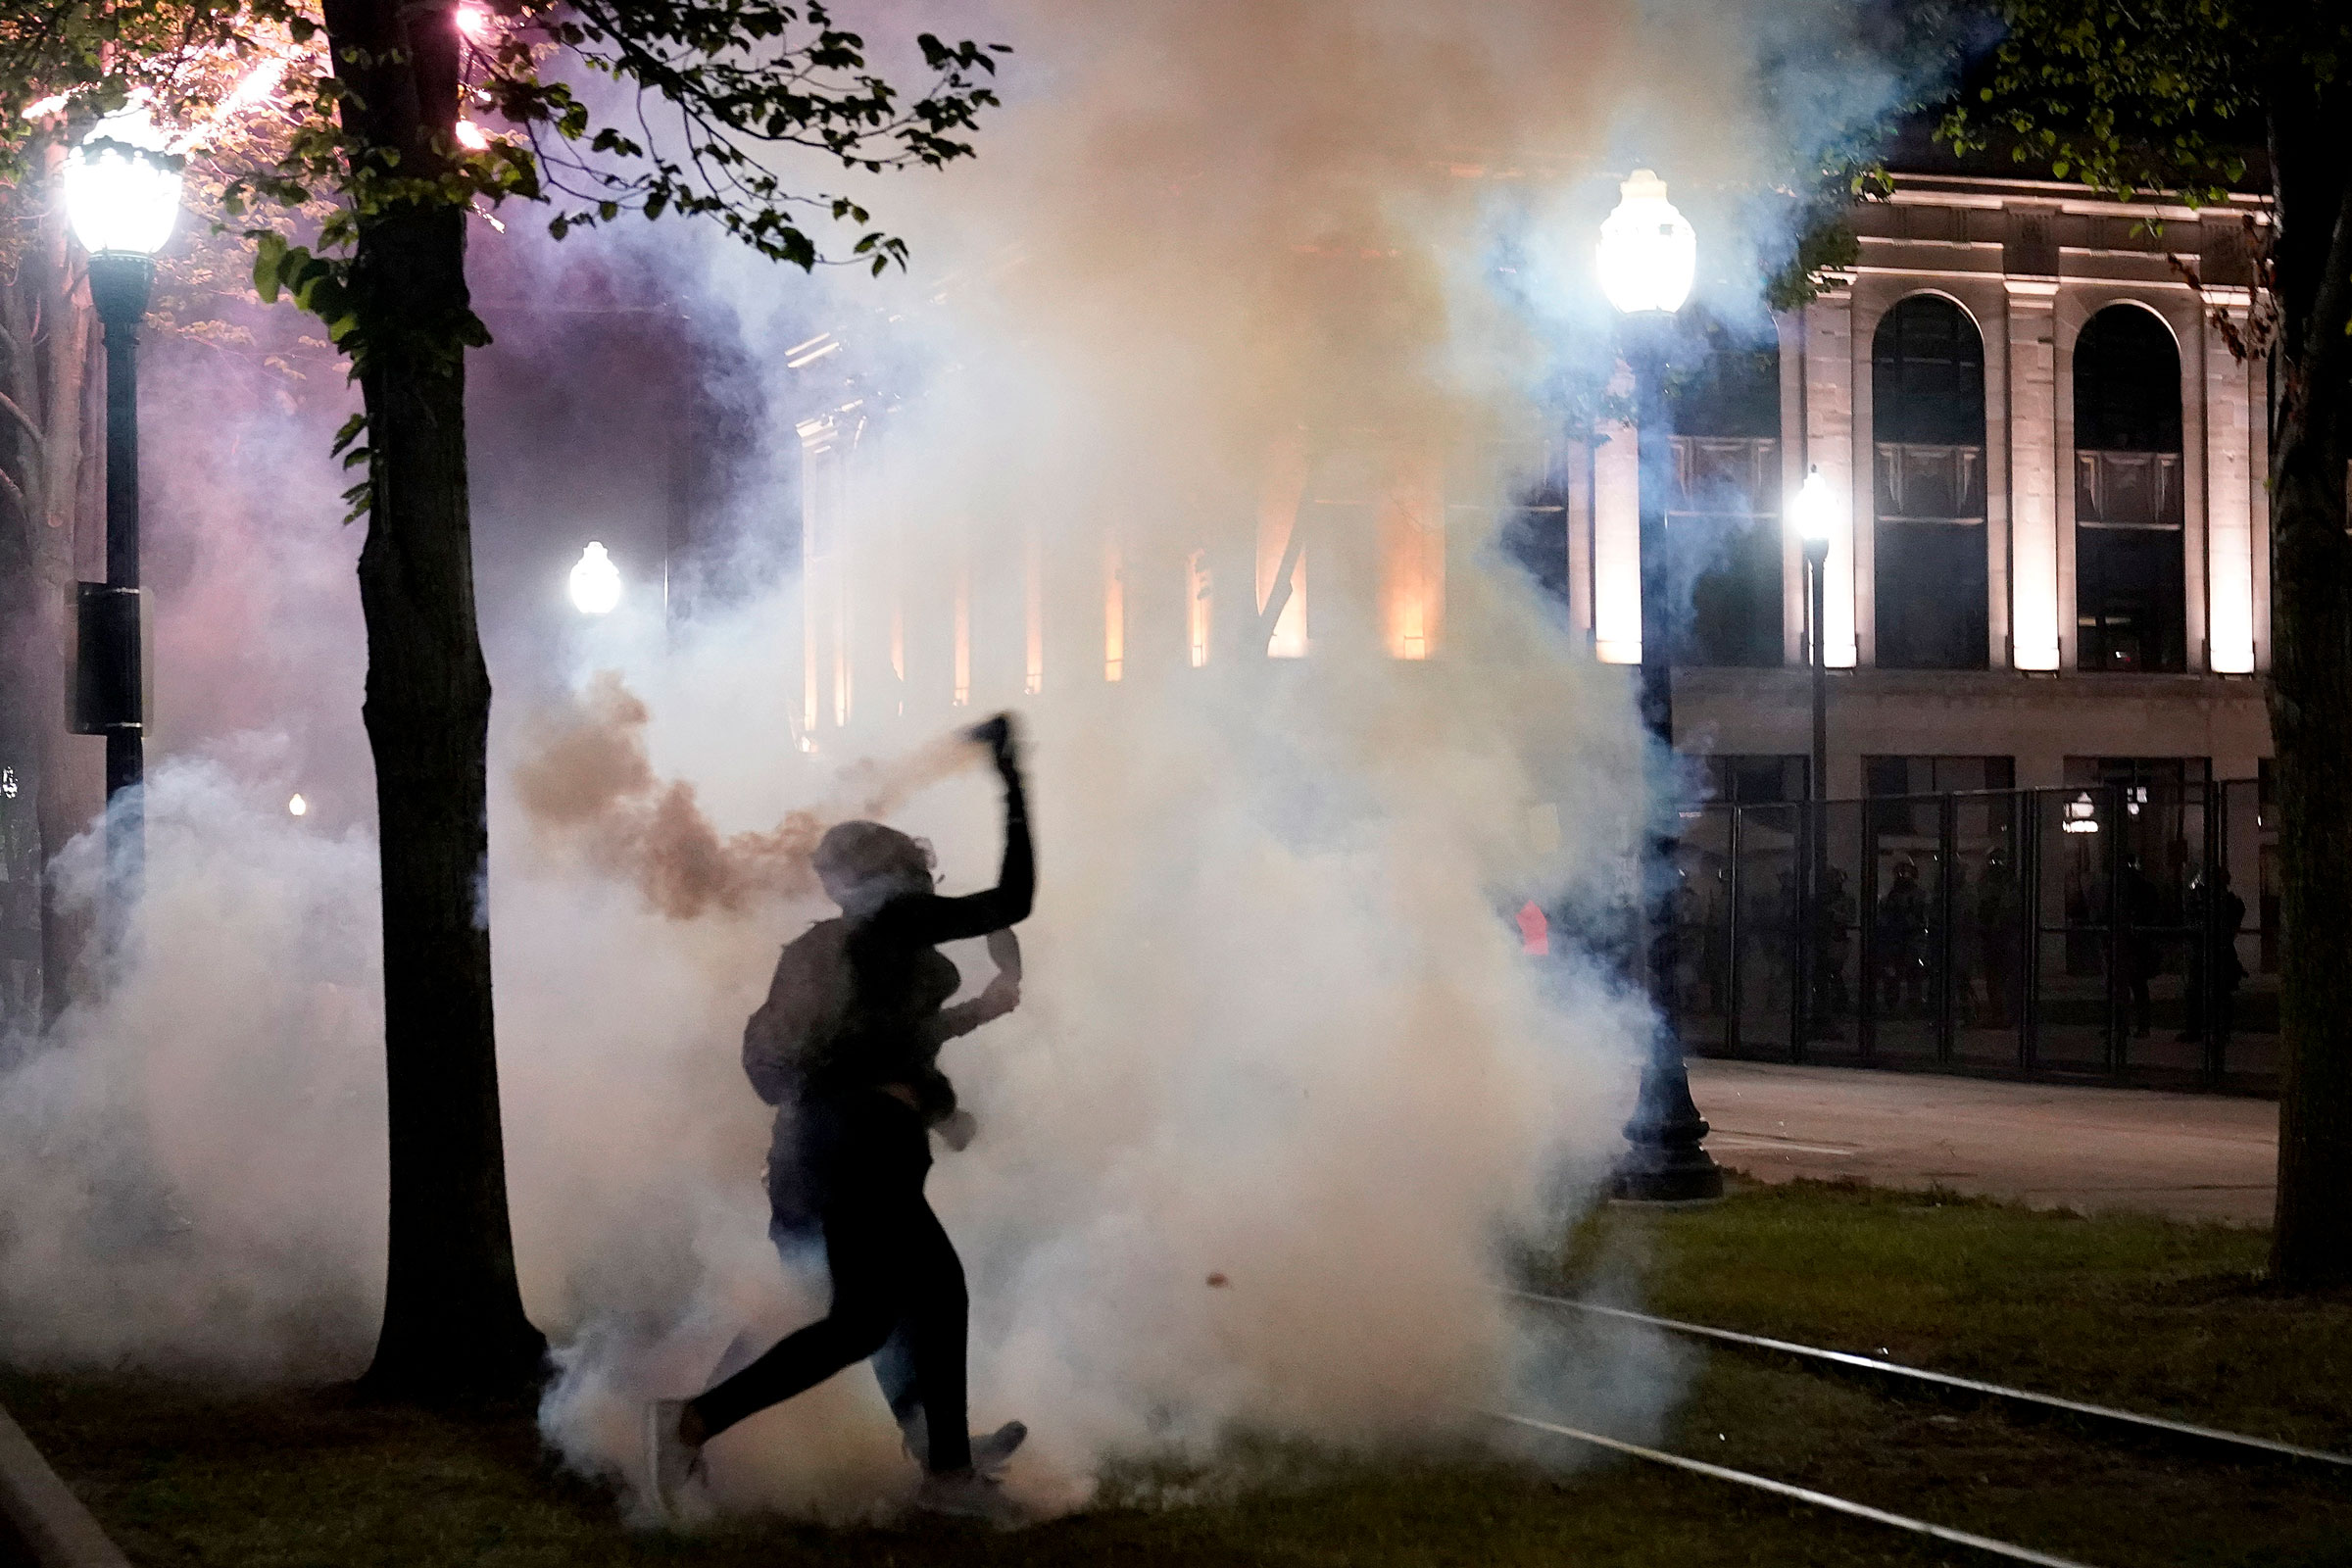 Unrest erupted for several days after an August 2020 police shooting in Kenosha, Wis. (David Goldman—AP)